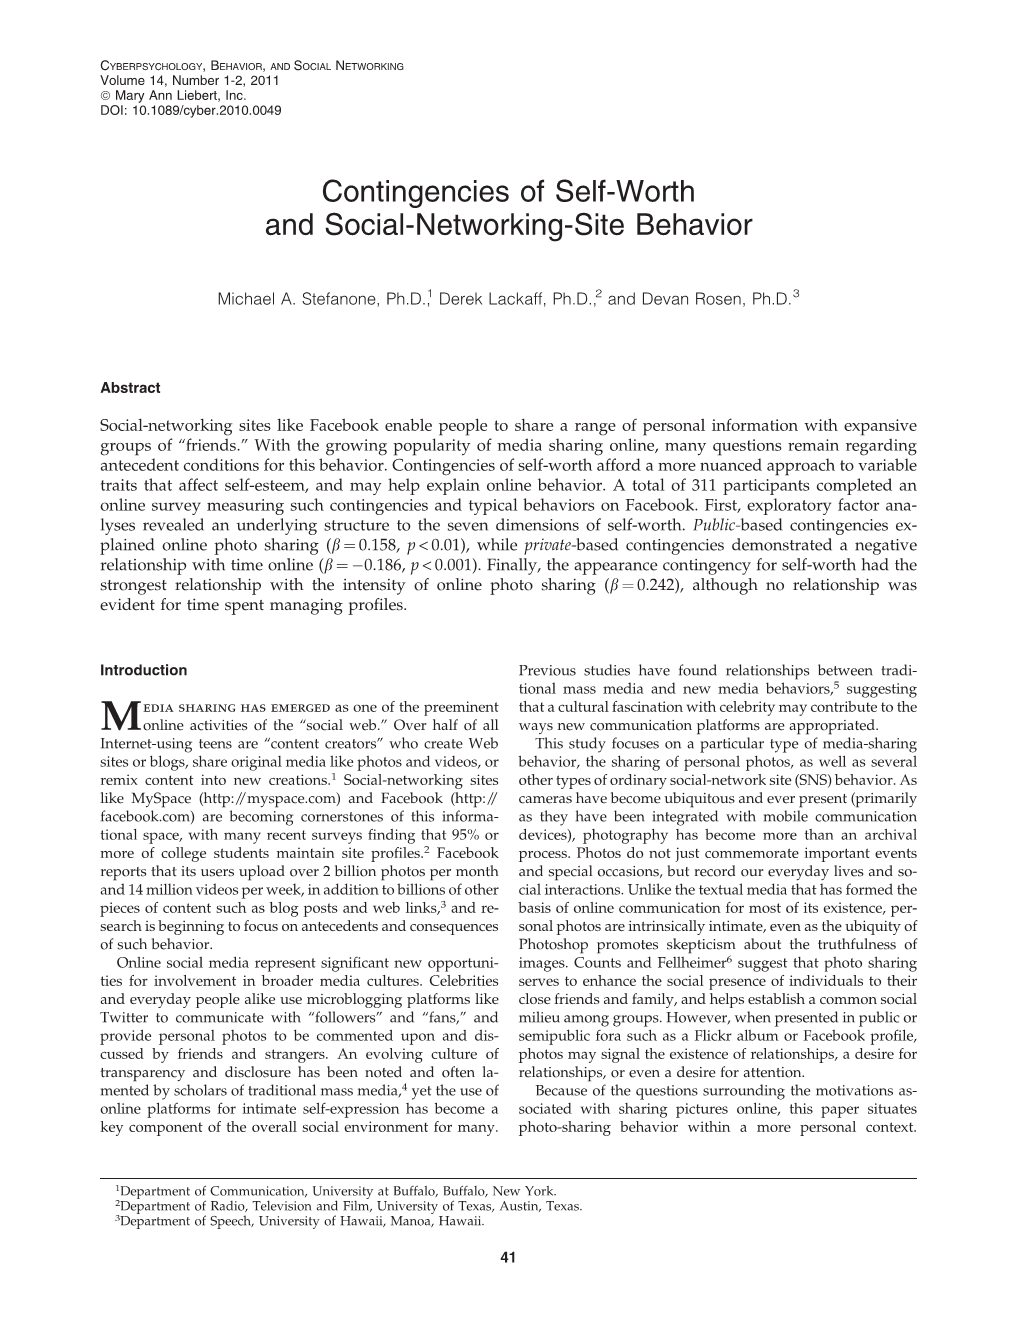 Contingencies of Self-Worth and Social-Networking-Site Behavior